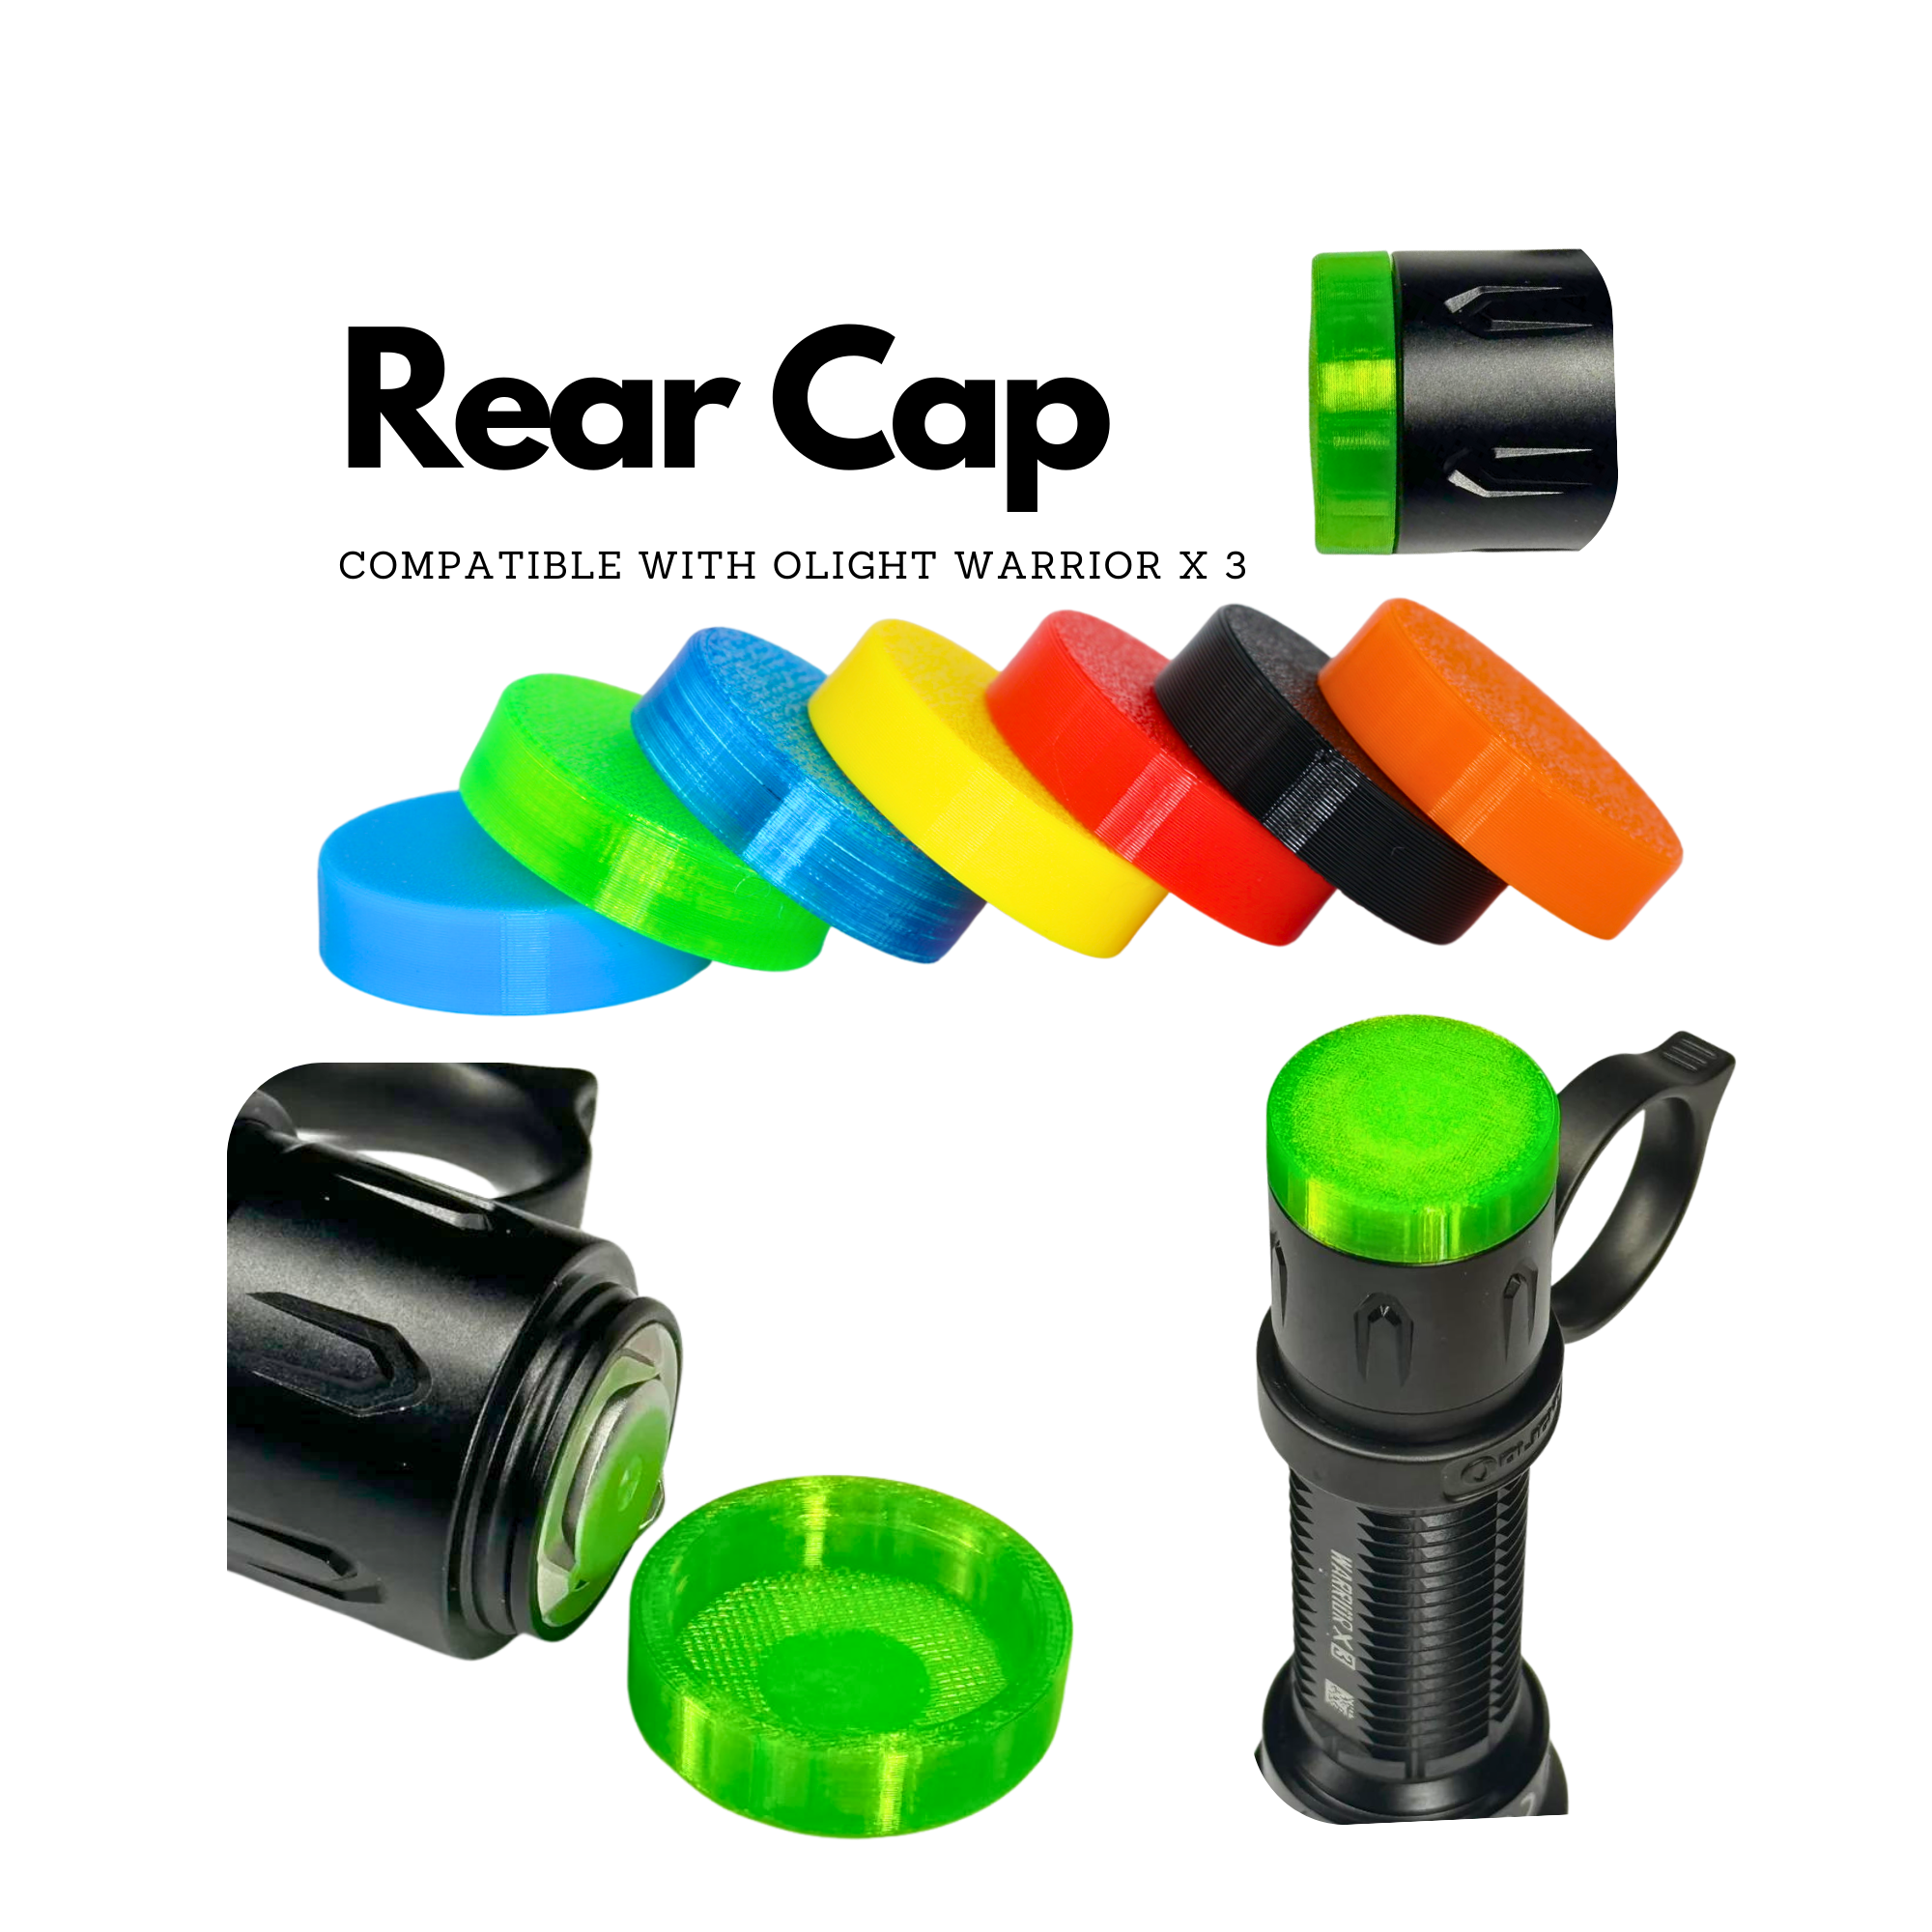 Rear cap compatible with Olight Warrior X 3